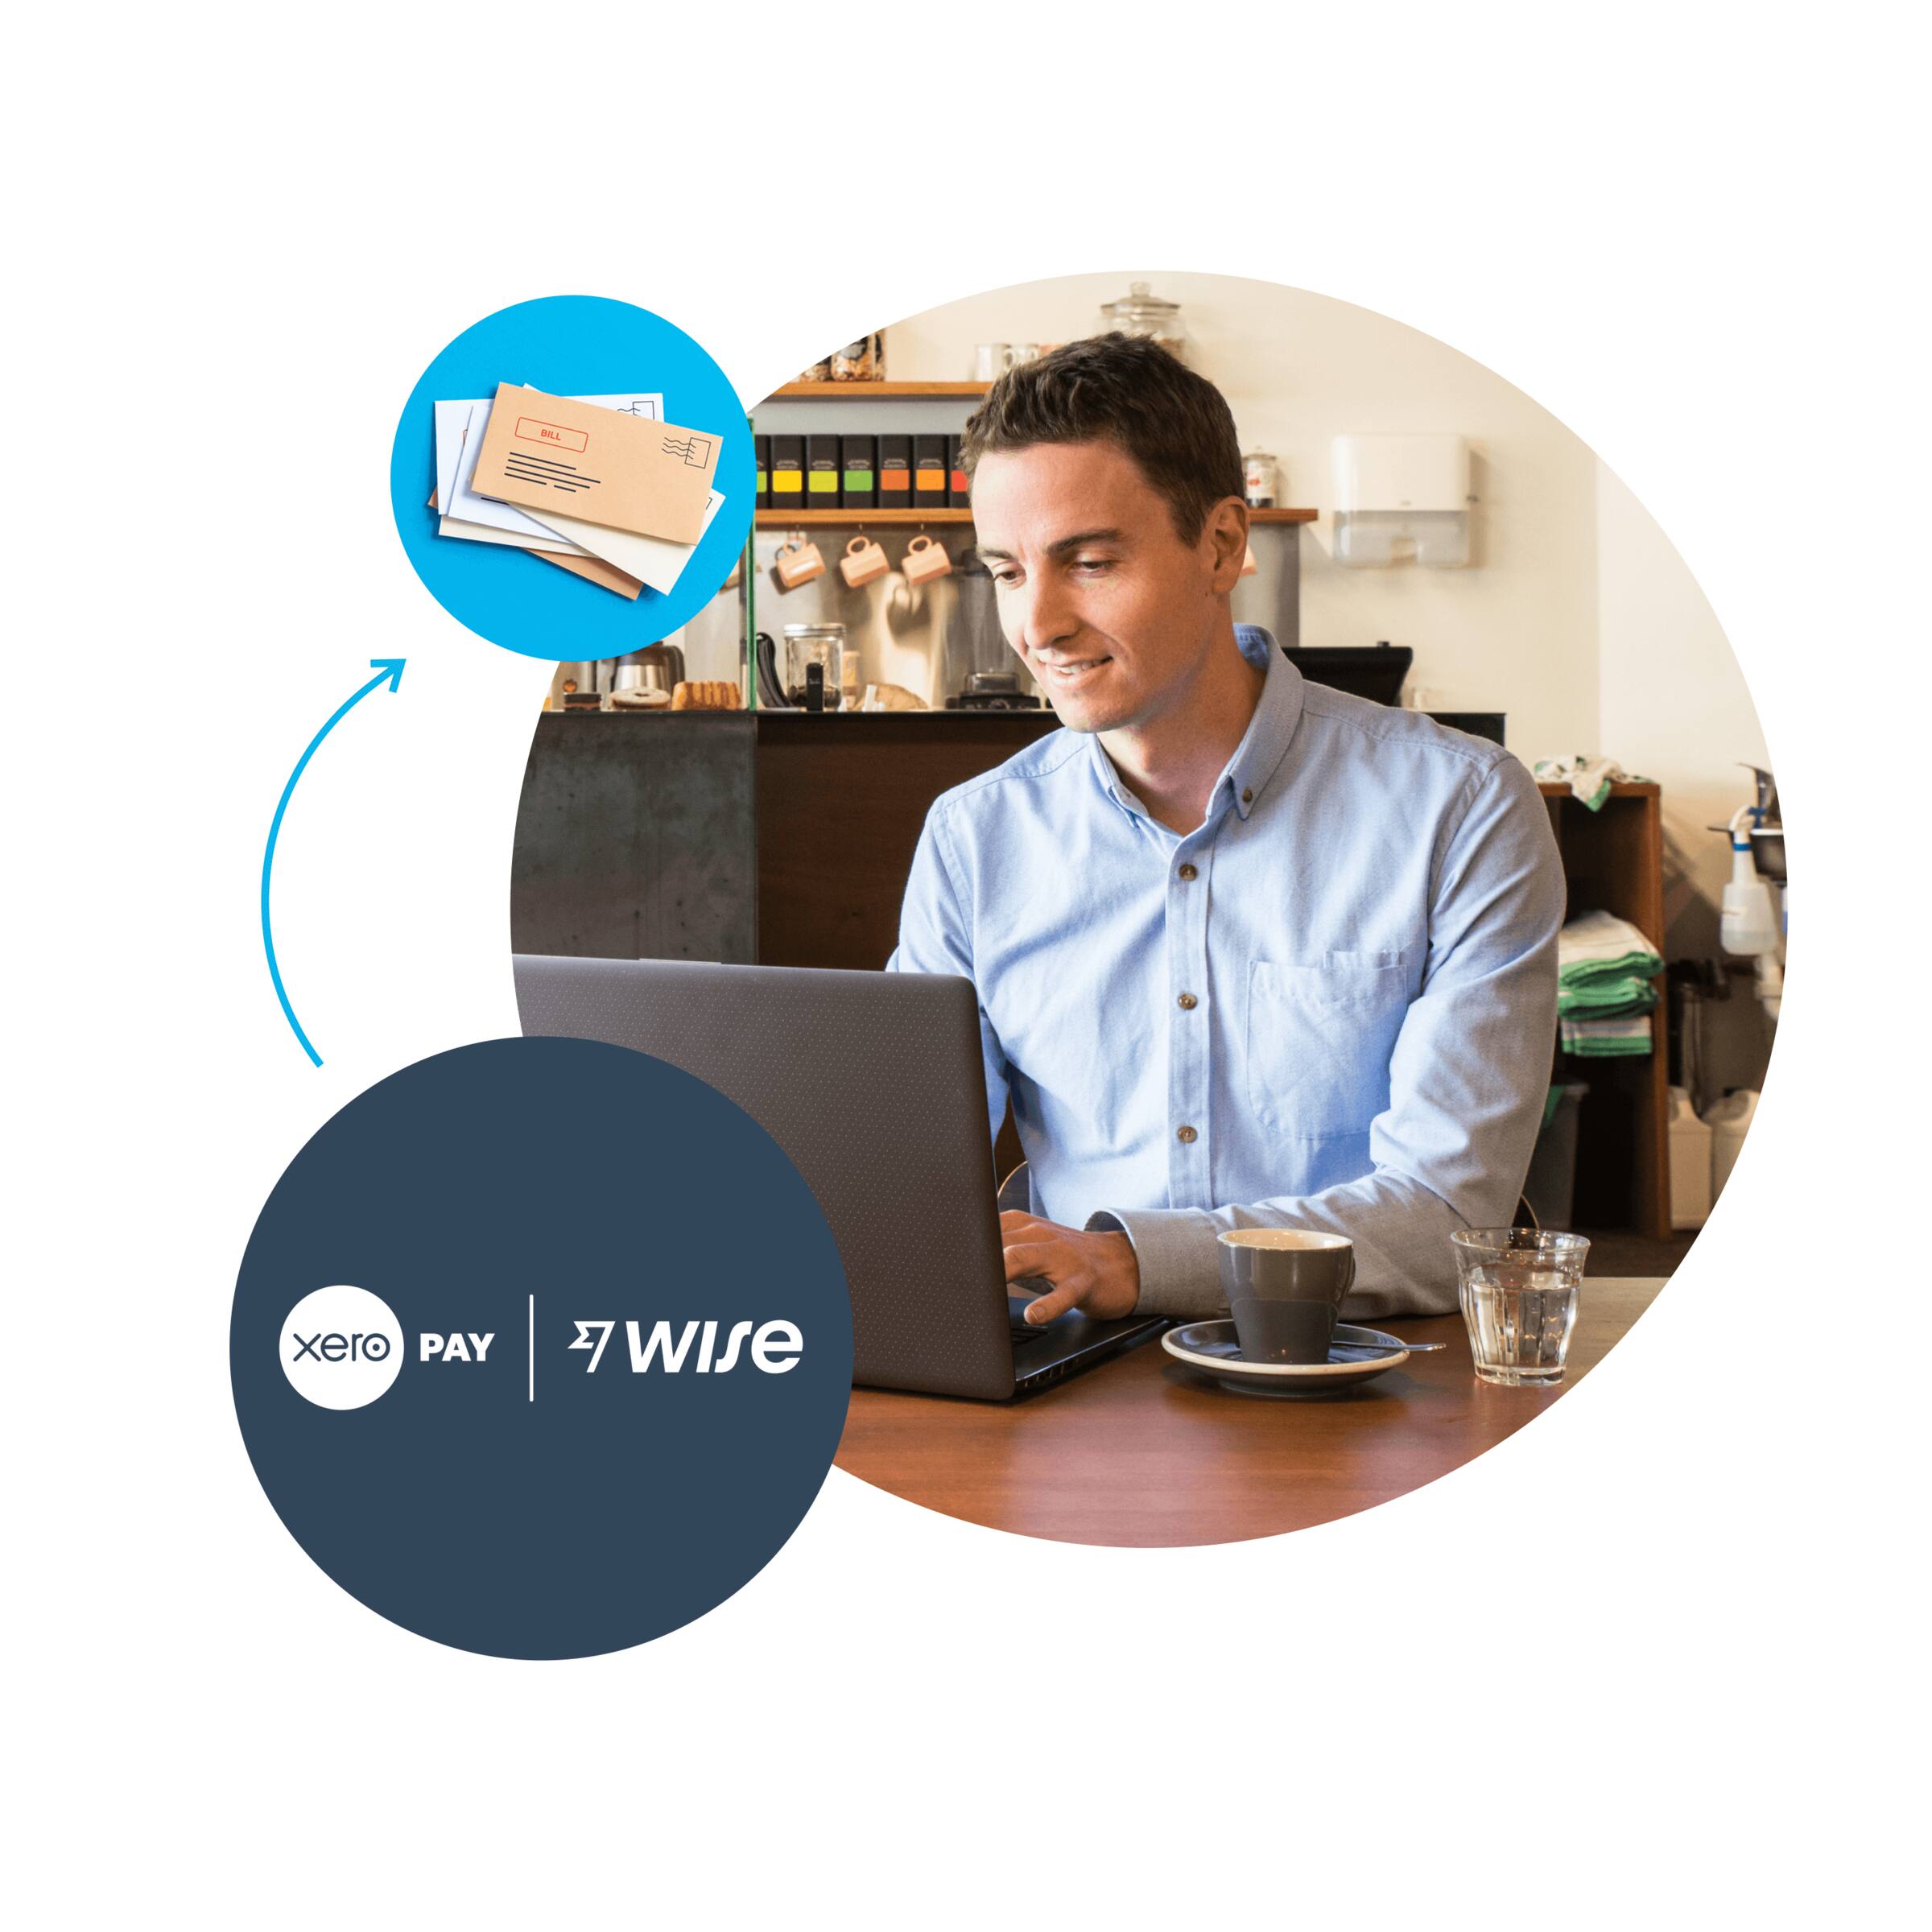 A small business owner sits in a cafe using their laptop to pay multiple bills using Xero Pay with Wise.